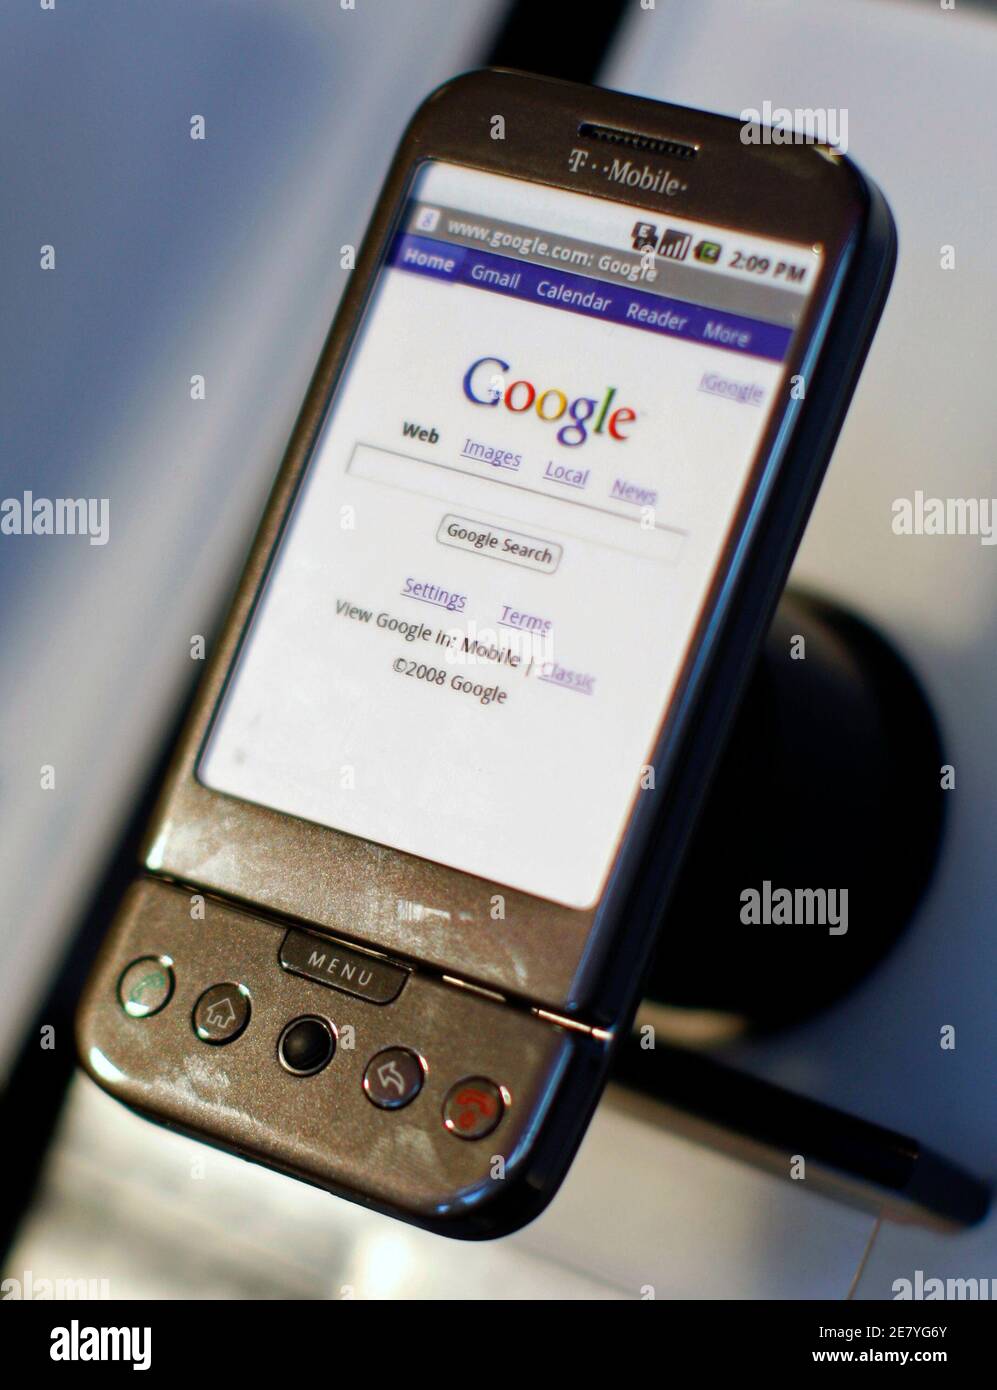 A Google T-Mobile G1 mobile telephone is seen on display at a T-Mobile store in New York City, October 22, 2008. REUTERS/Mike Segar  (UNITED STATES) Stock Photo